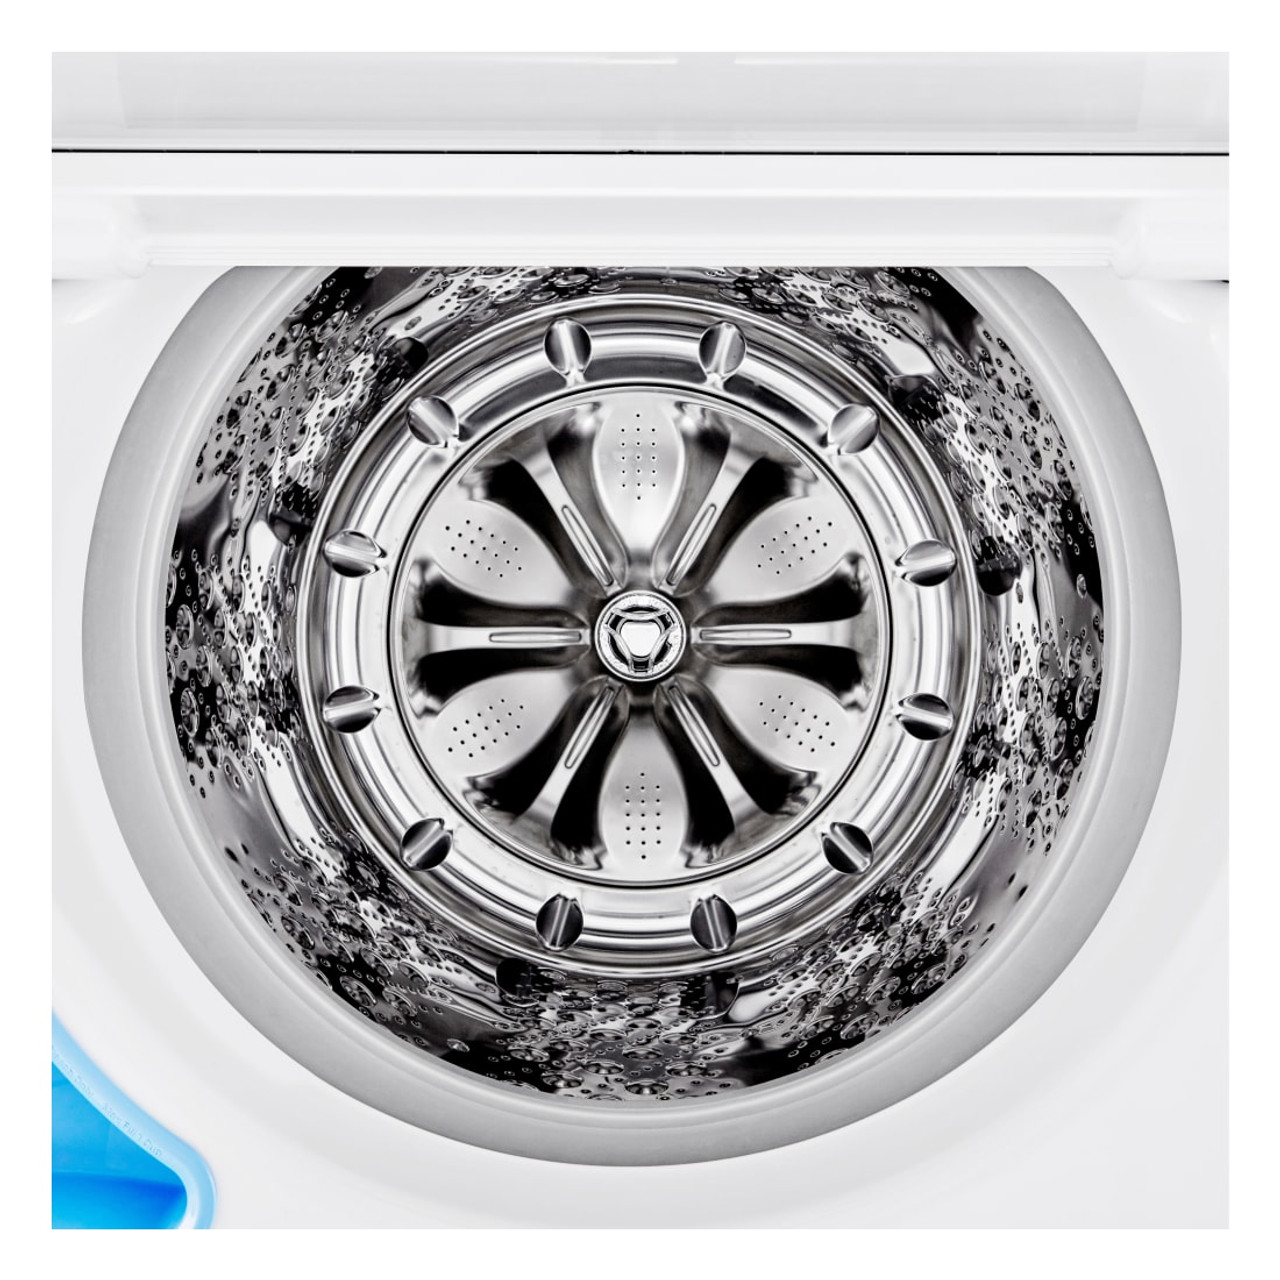 LG 5.5 cu.ft. Mega Capacity Smart Wi-Fi Enabled Top Load Washer with TurboWash3D Technology and Allergiene Cycle - WT7900HWA